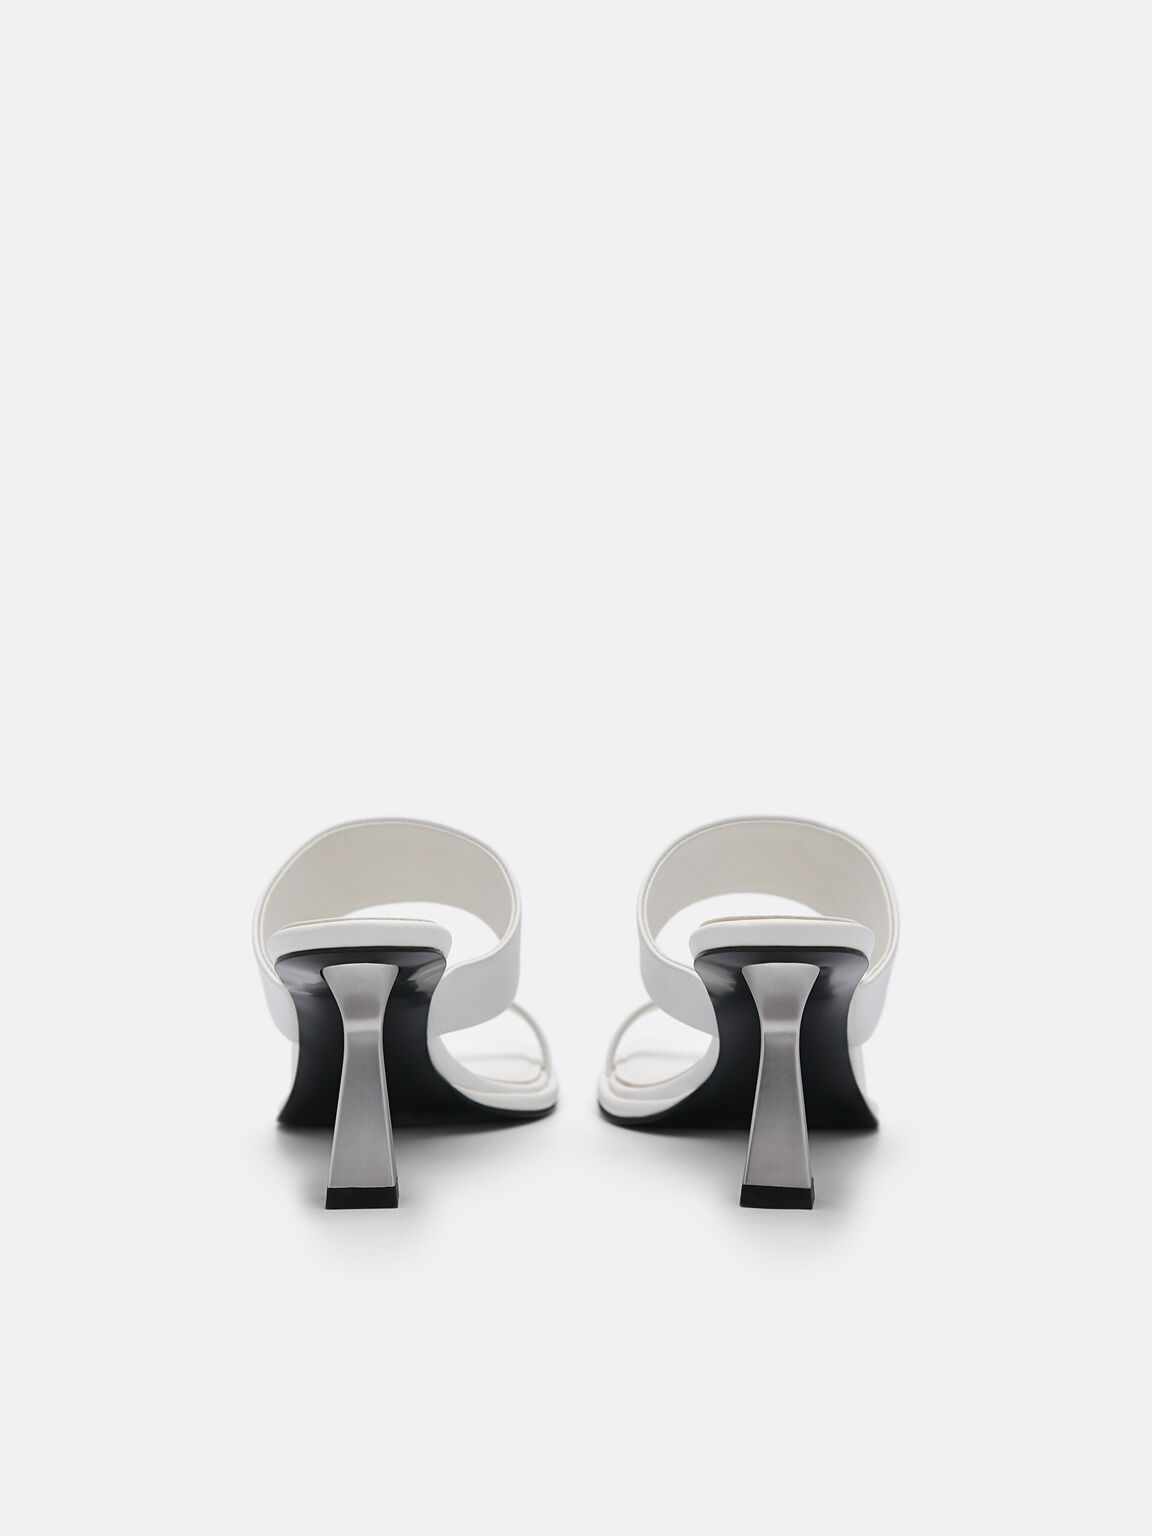 Amelie Leather Heel Sandals, White